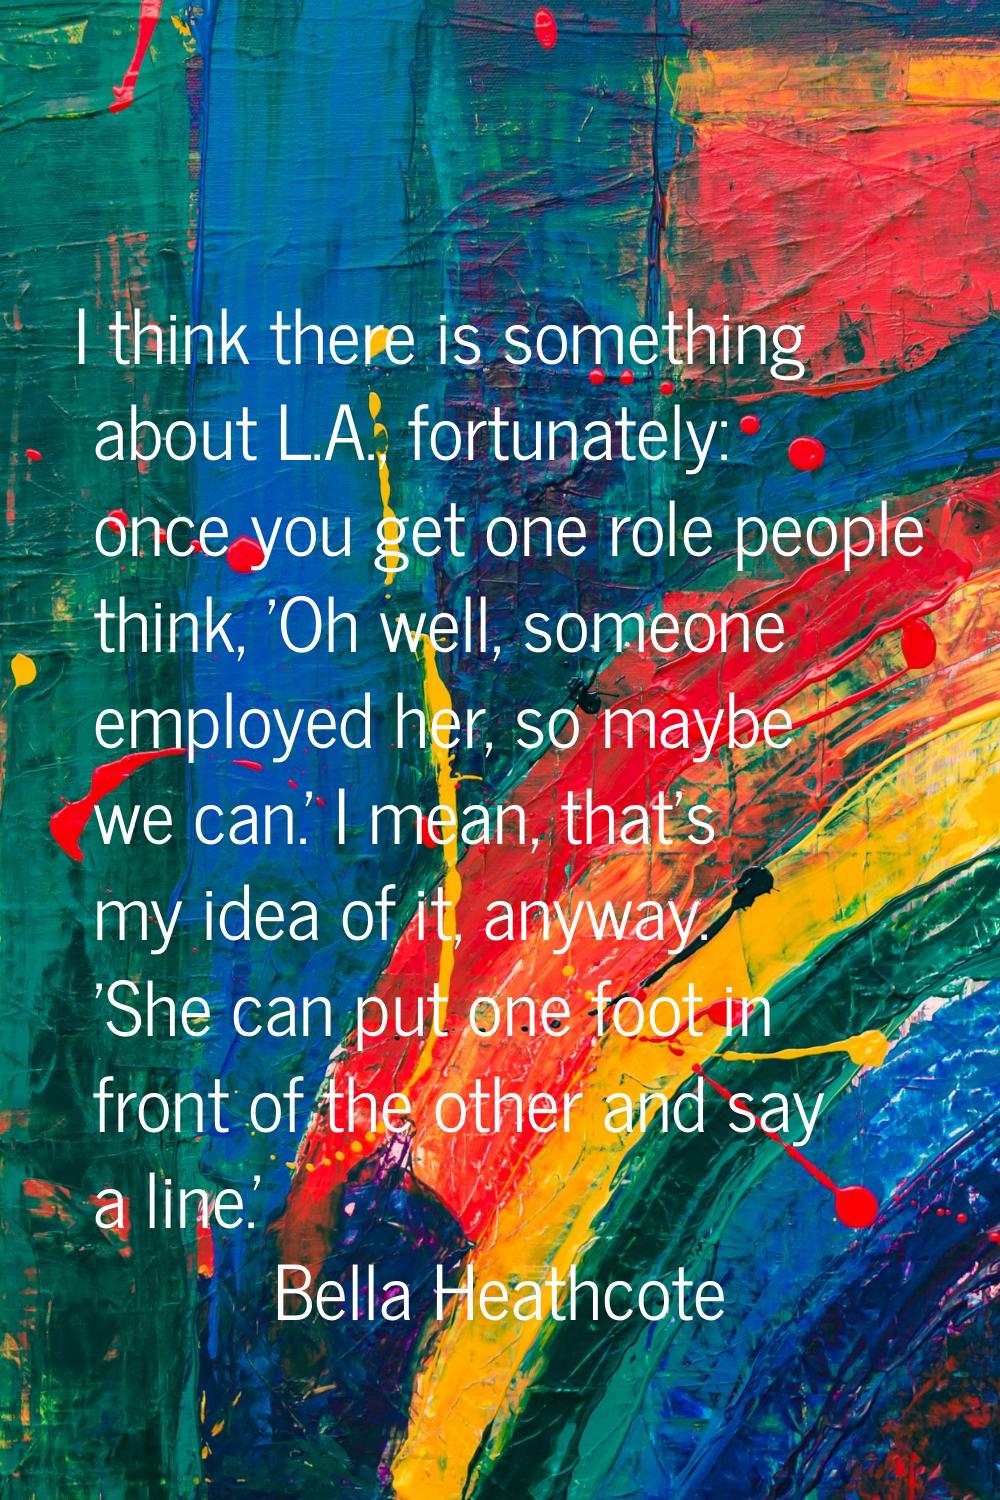 I think there is something about L.A., fortunately: once you get one role people think, 'Oh well, s